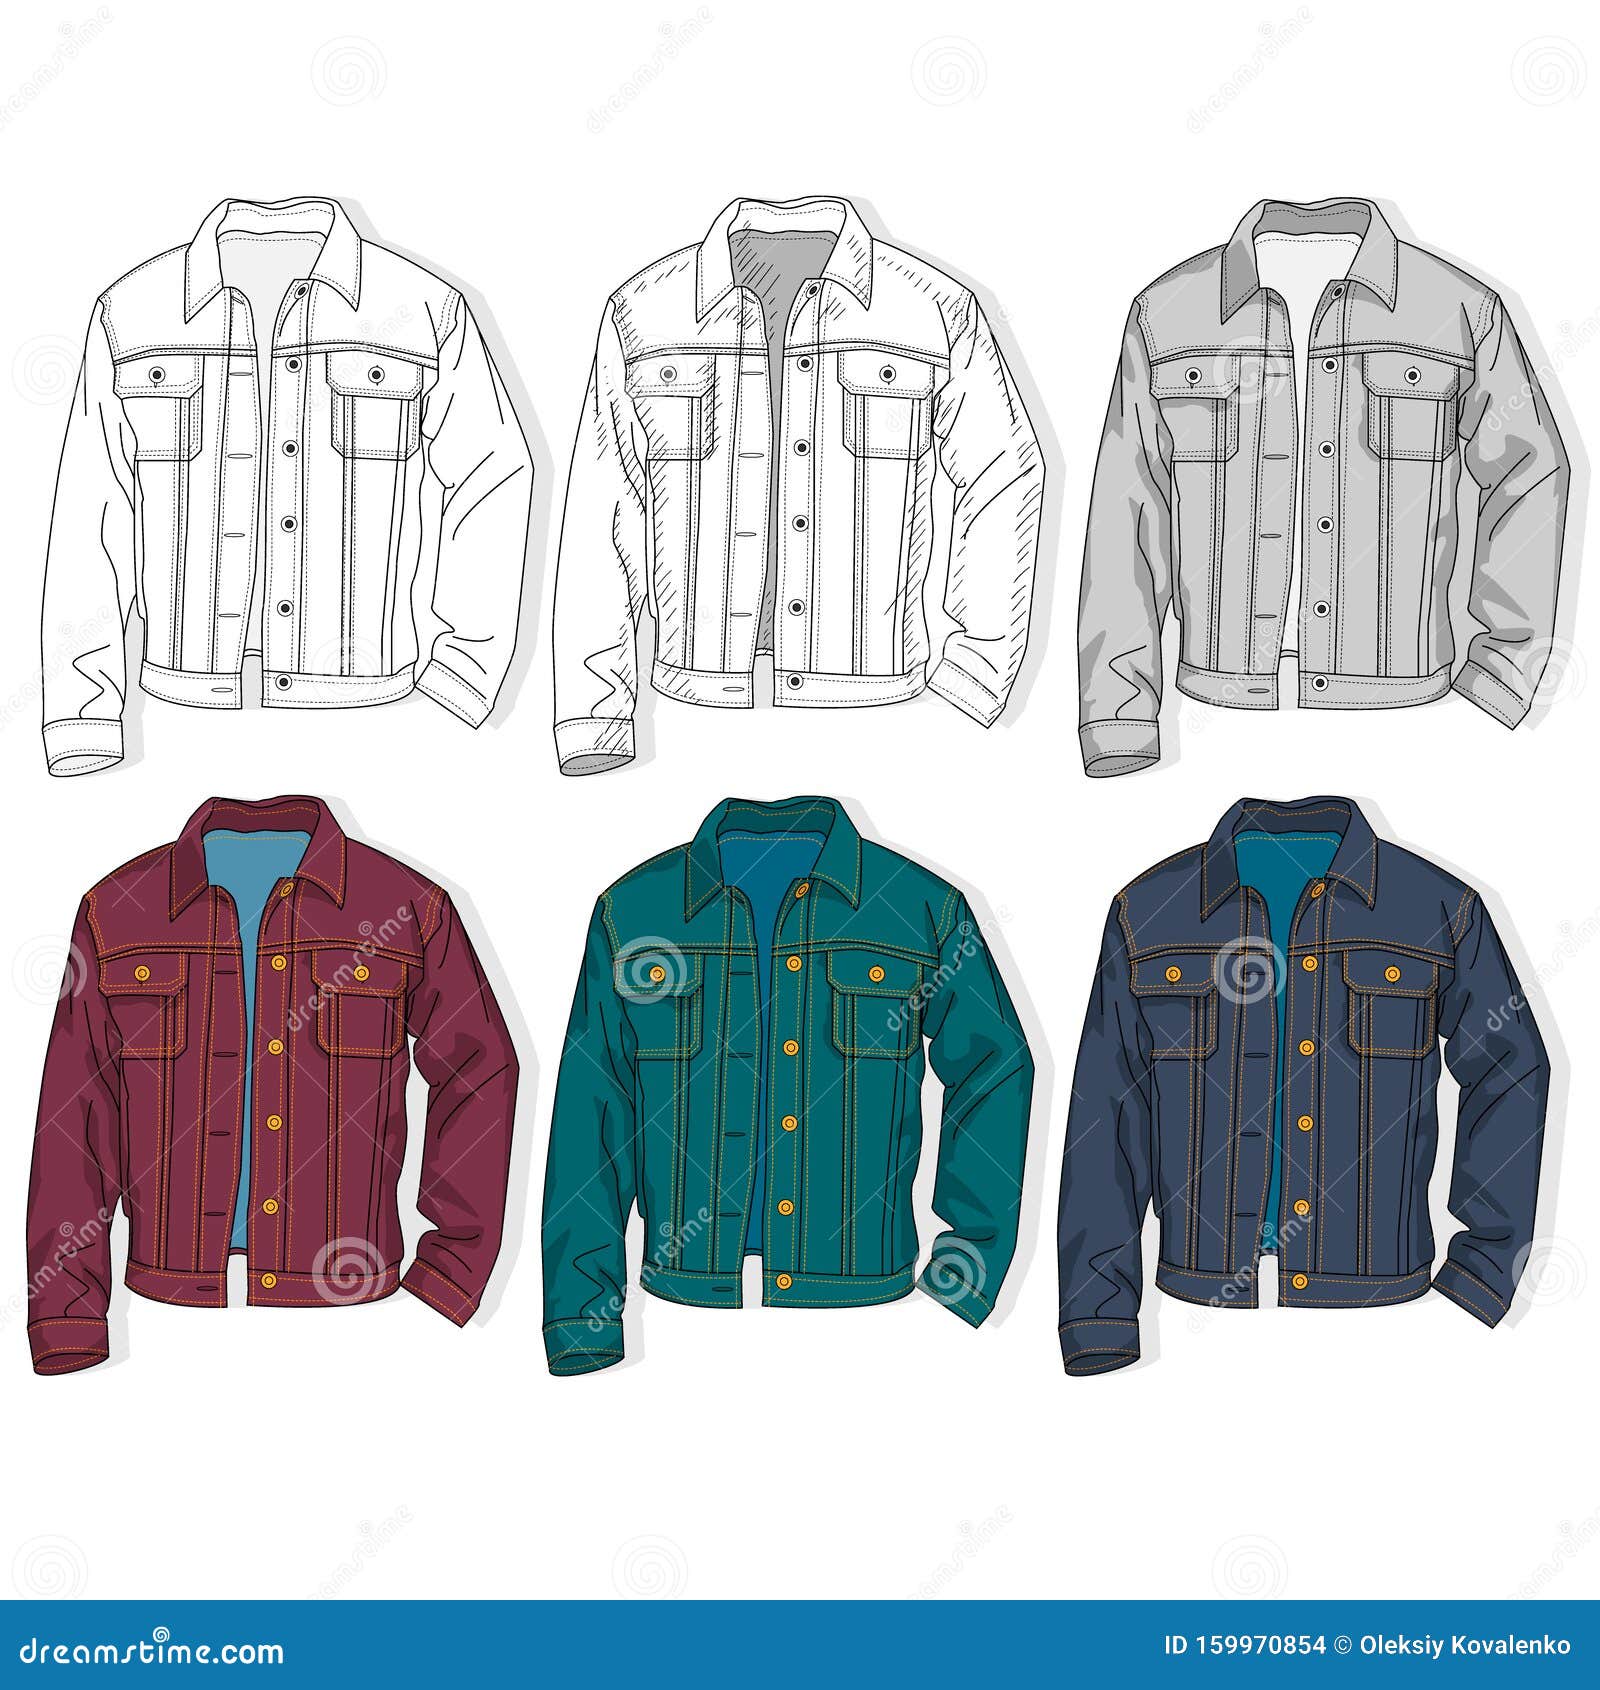 Denim Jacket Vector Art Icons and Graphics for Free Download